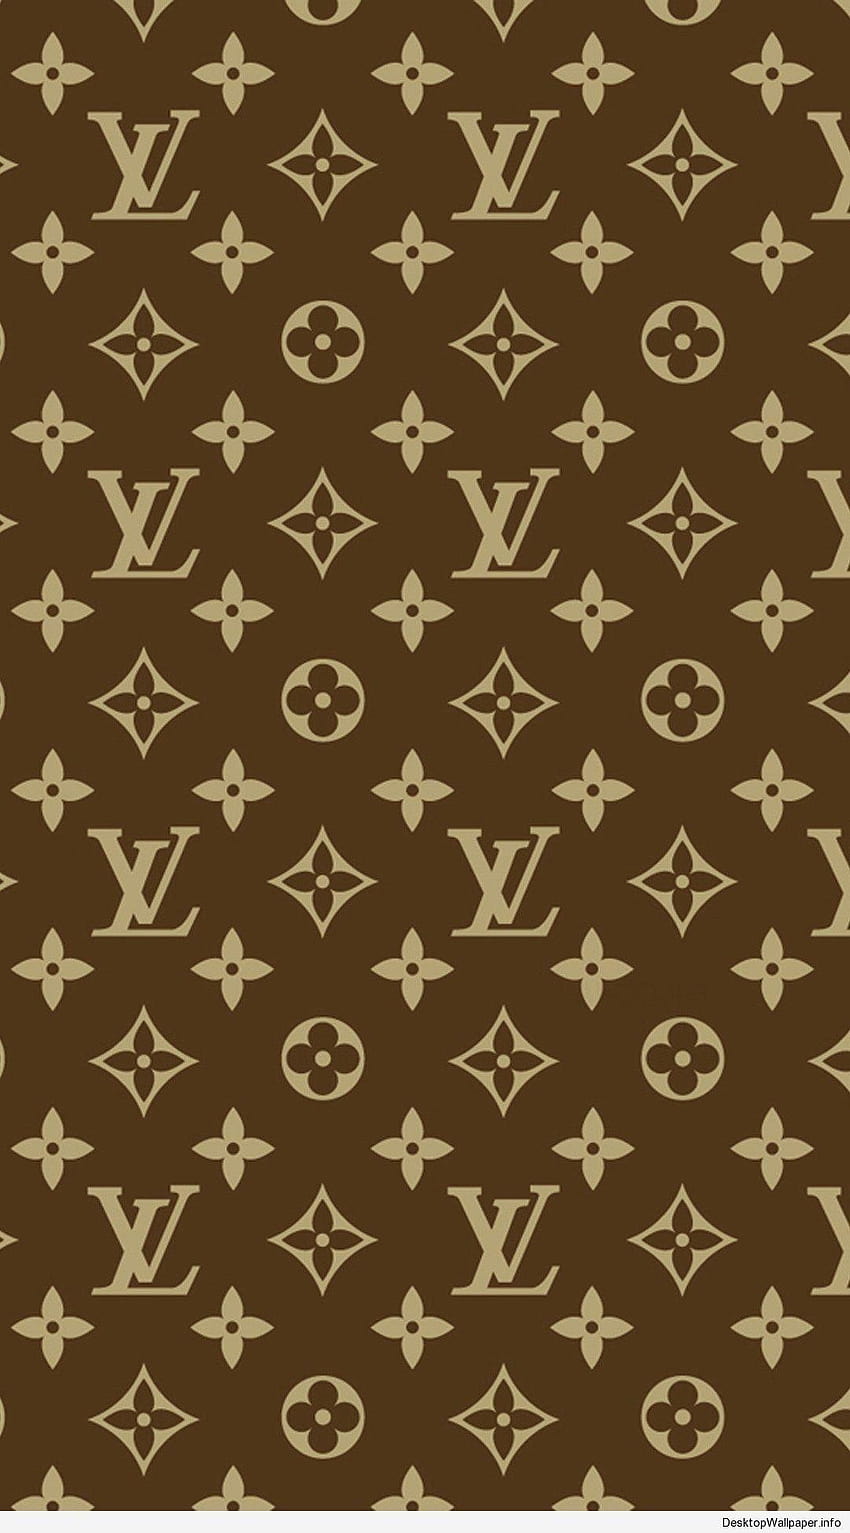 Supreme Louis Vuitton Background Posted By Michelle Tremblay